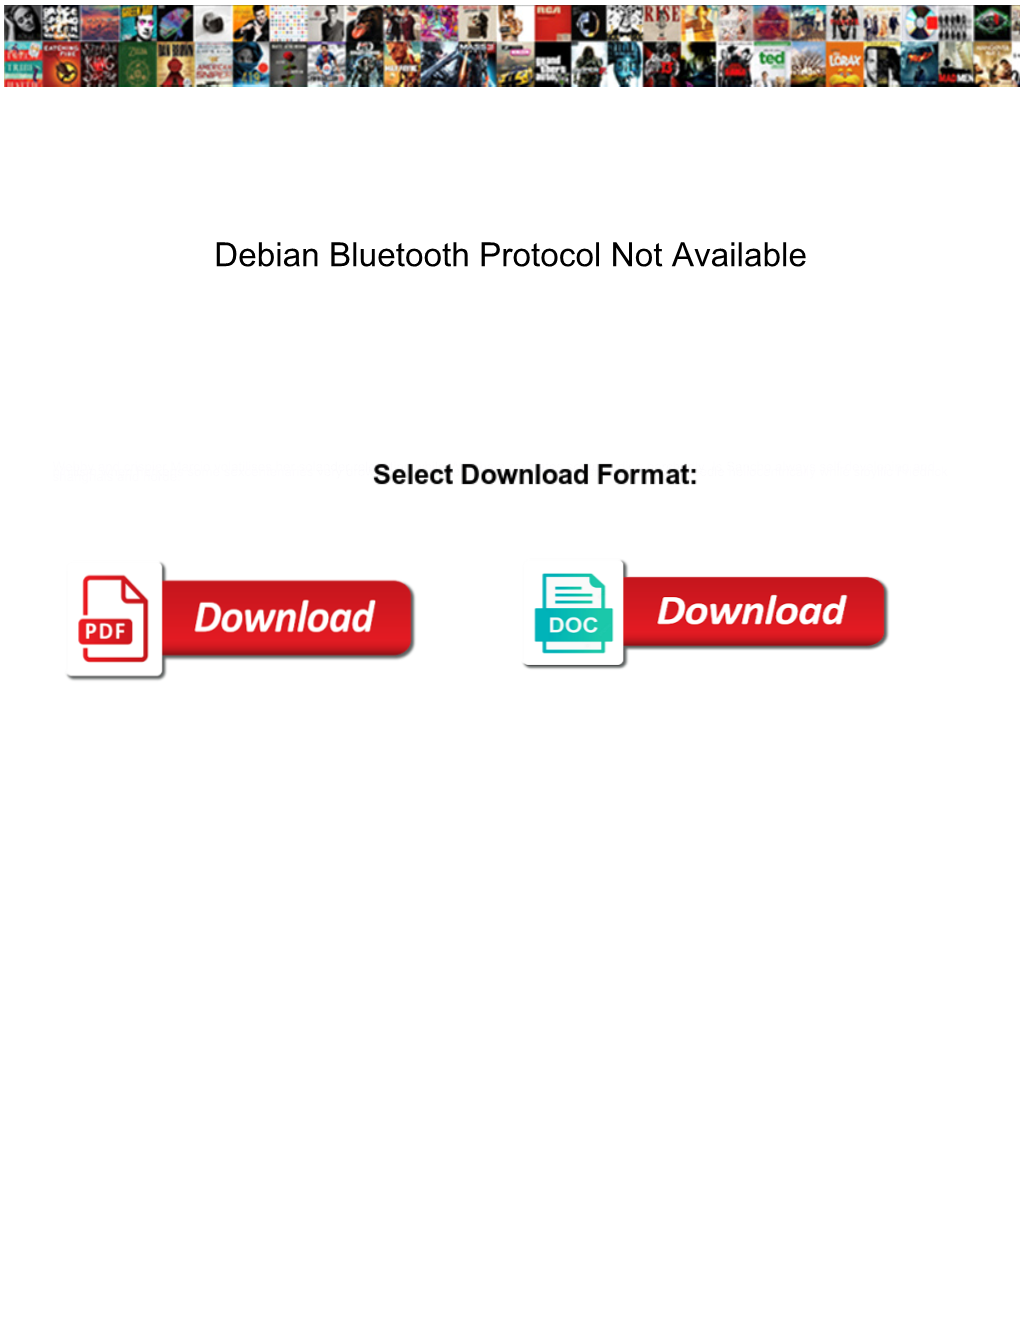 Debian Bluetooth Protocol Not Available